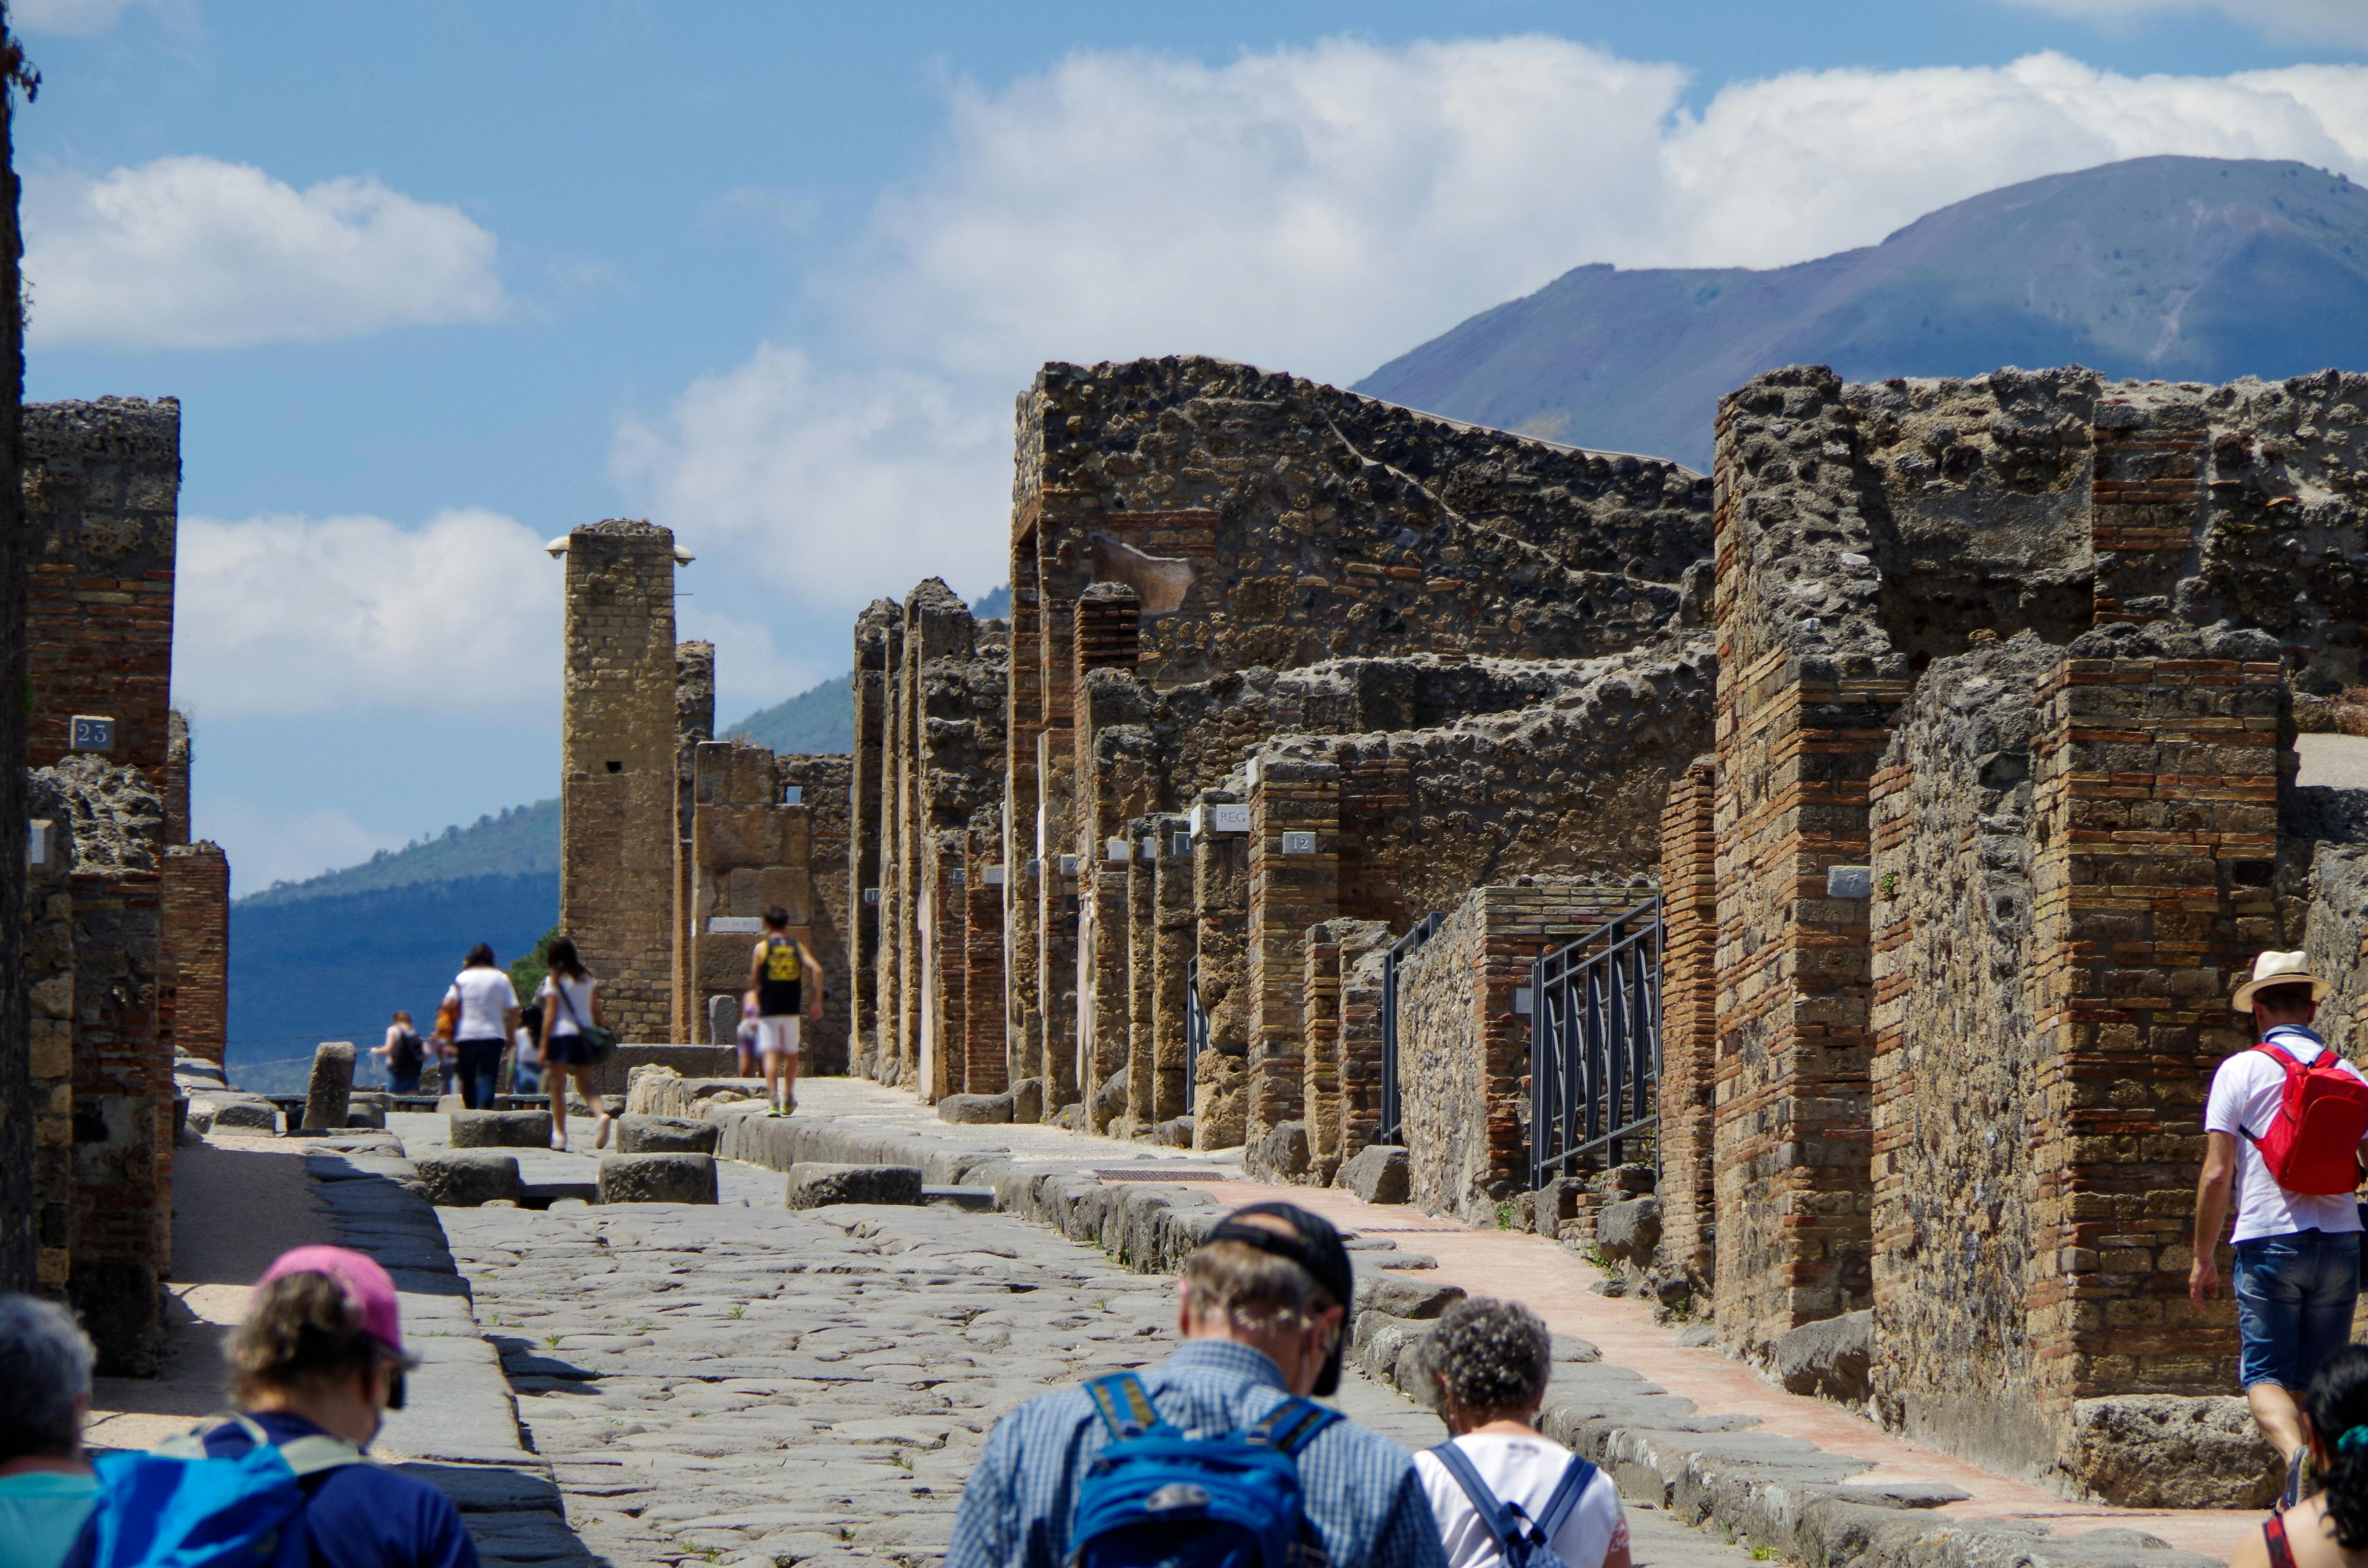 Pompeii guided tour with skip the line ticket. Musement